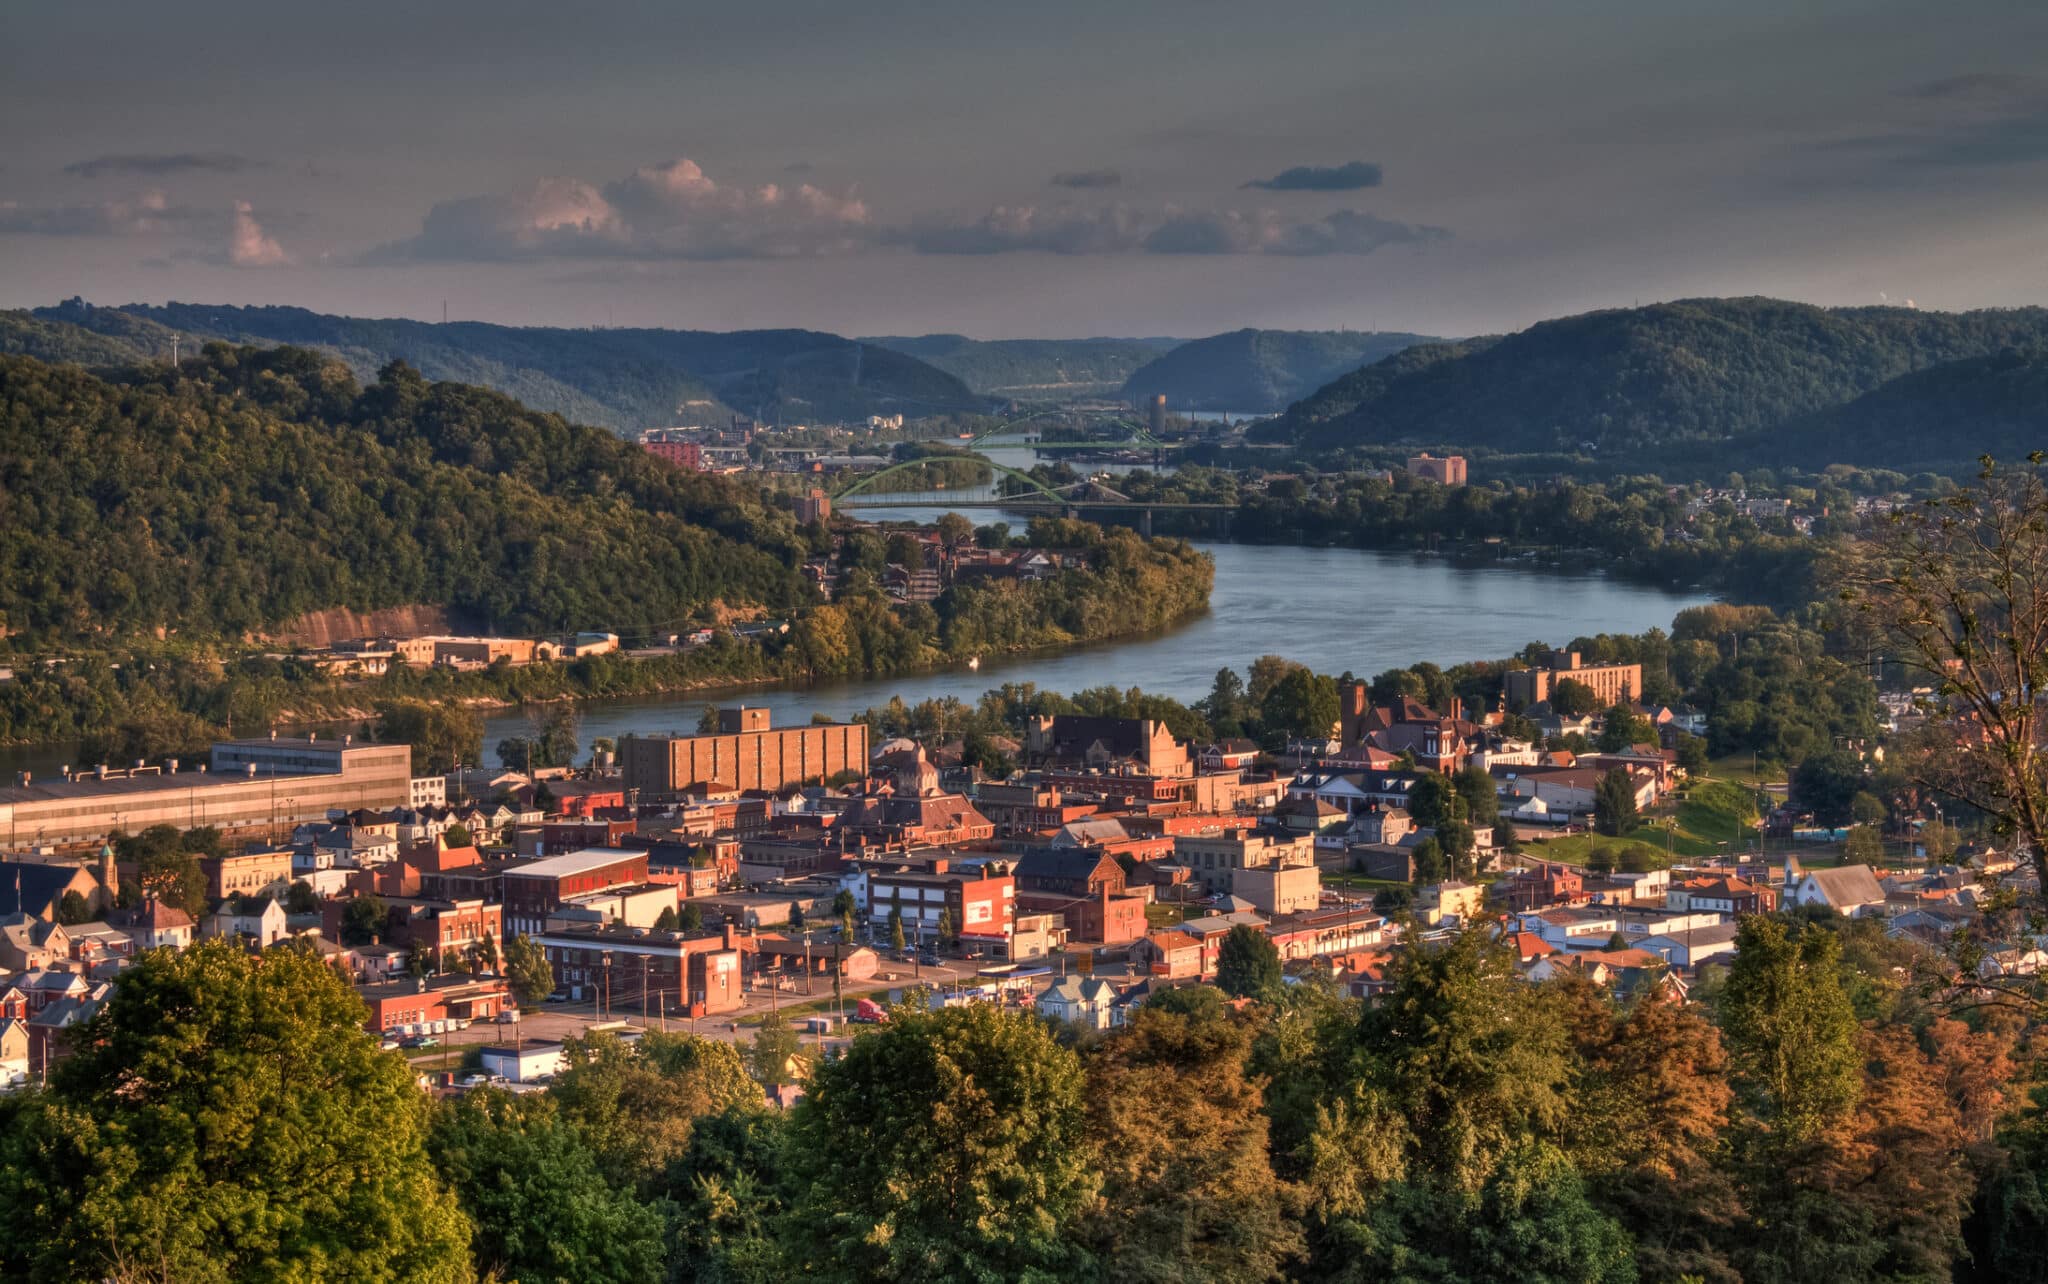 The City of Martins Ferry at Sunset